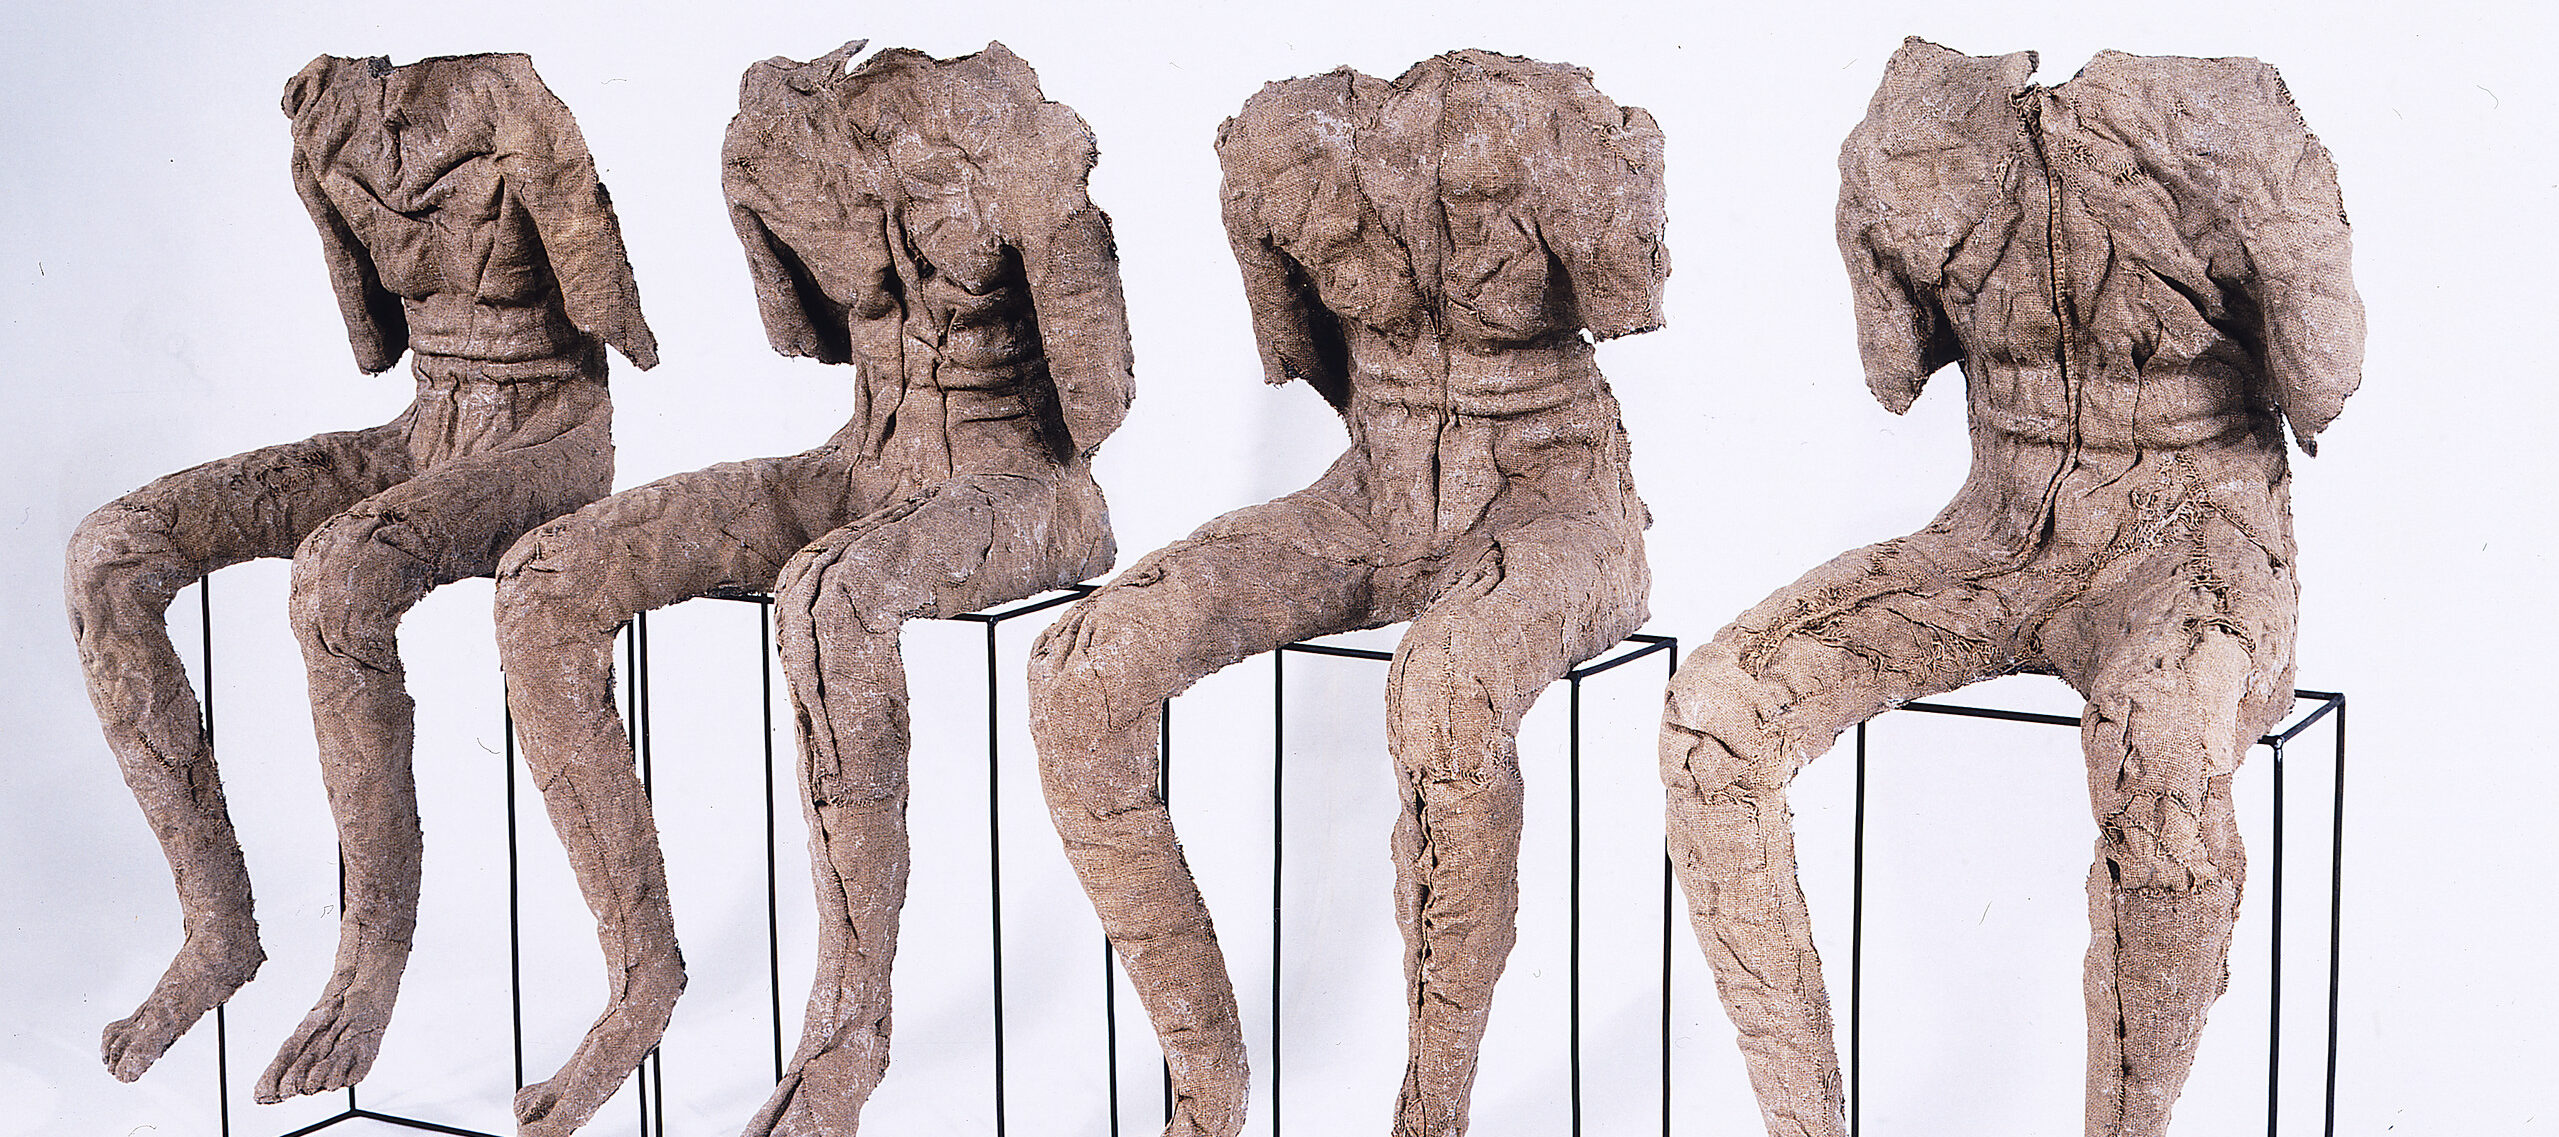 Four androgynous figures rendered in stiffened, brown burlap sit atop vertical, rectangular metal frames. They lack necks, heads, lower arms, and clothing, and their upper torsos slump slightly forward. The burlap’s color and bumpy texture evoke bark and mummy wrappings.